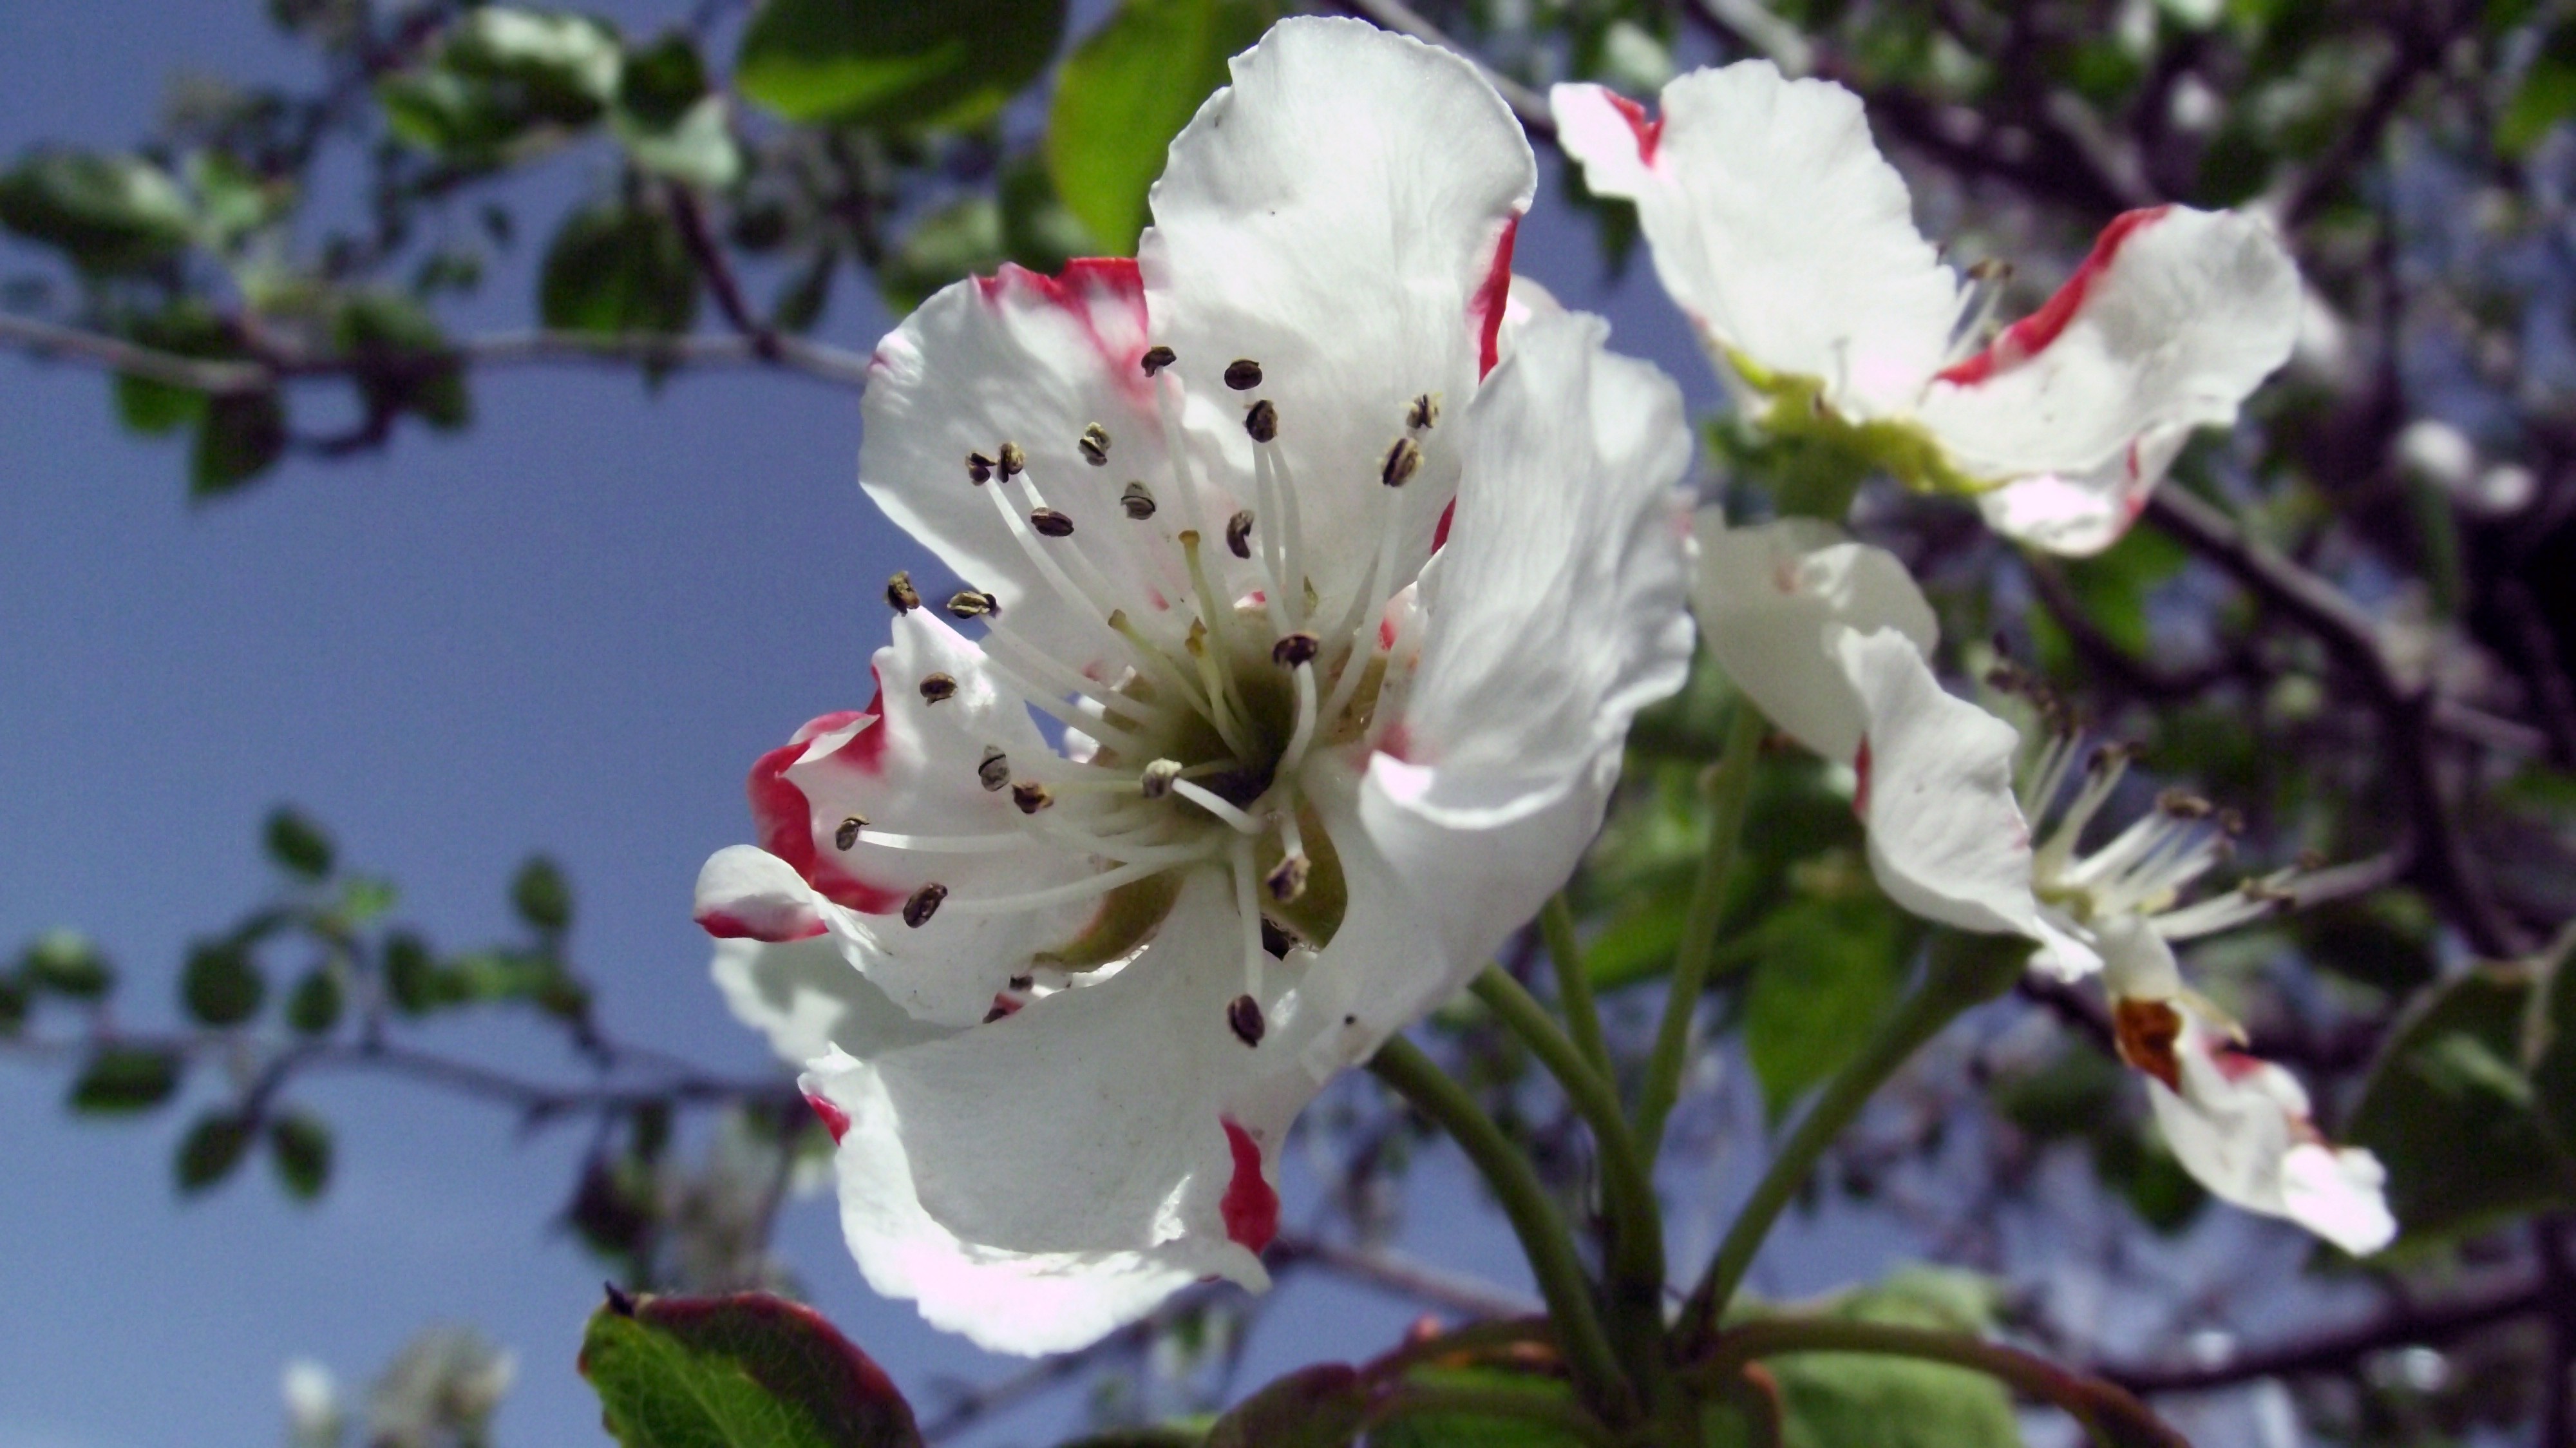 General 4000x2248 blossoms flowers white flowers spring apples plants